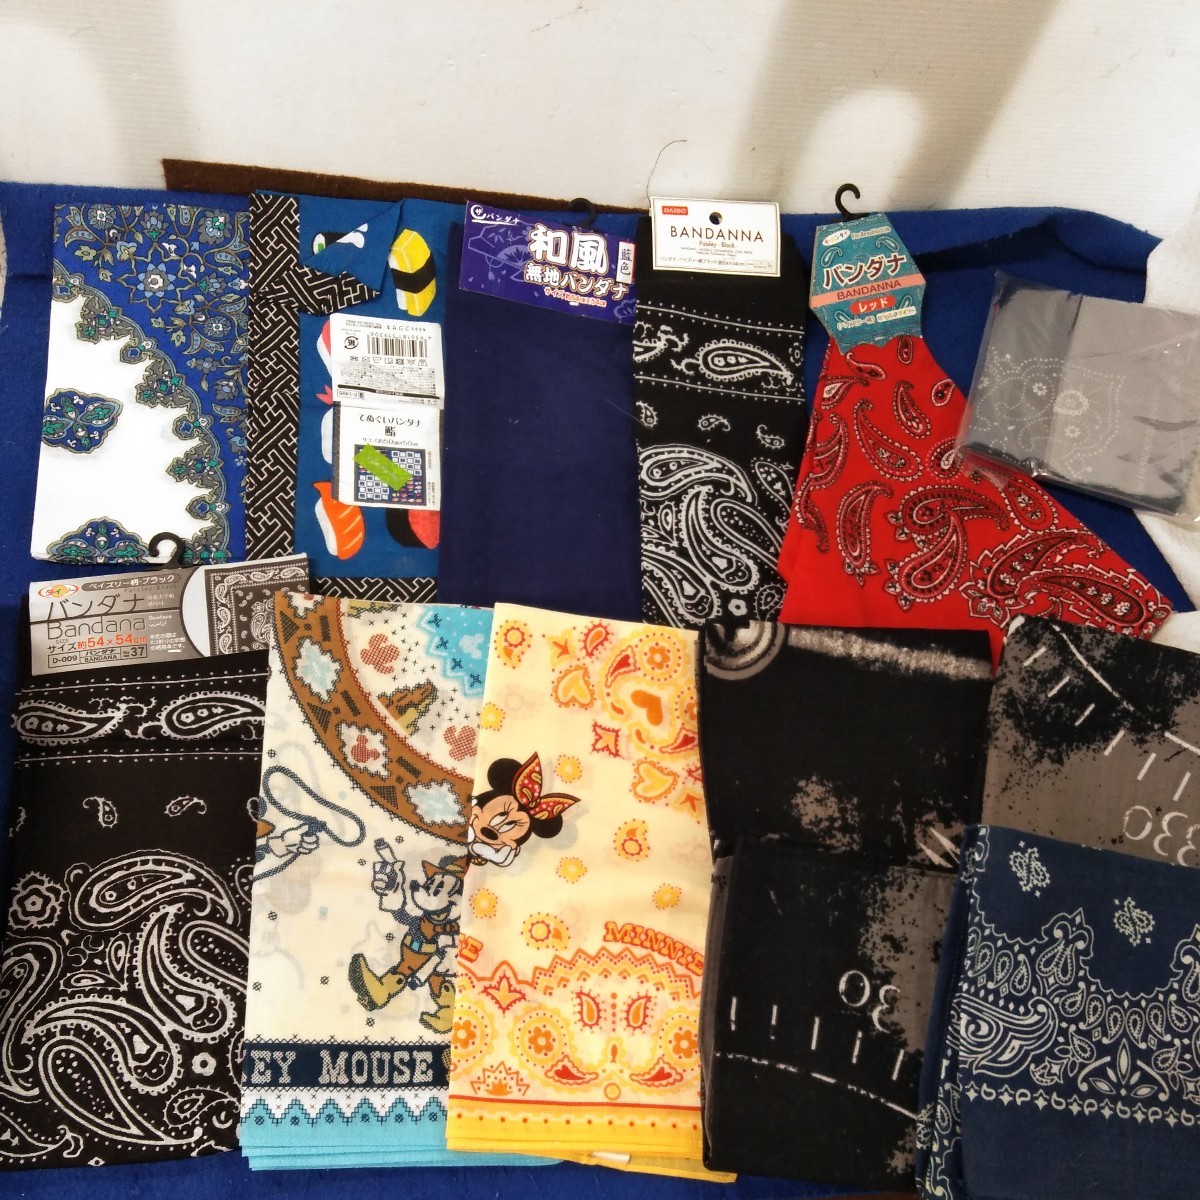 g_t R002 used bandana large size is ... other fully! set sale! fashion accessories household articles unused goods equipped.